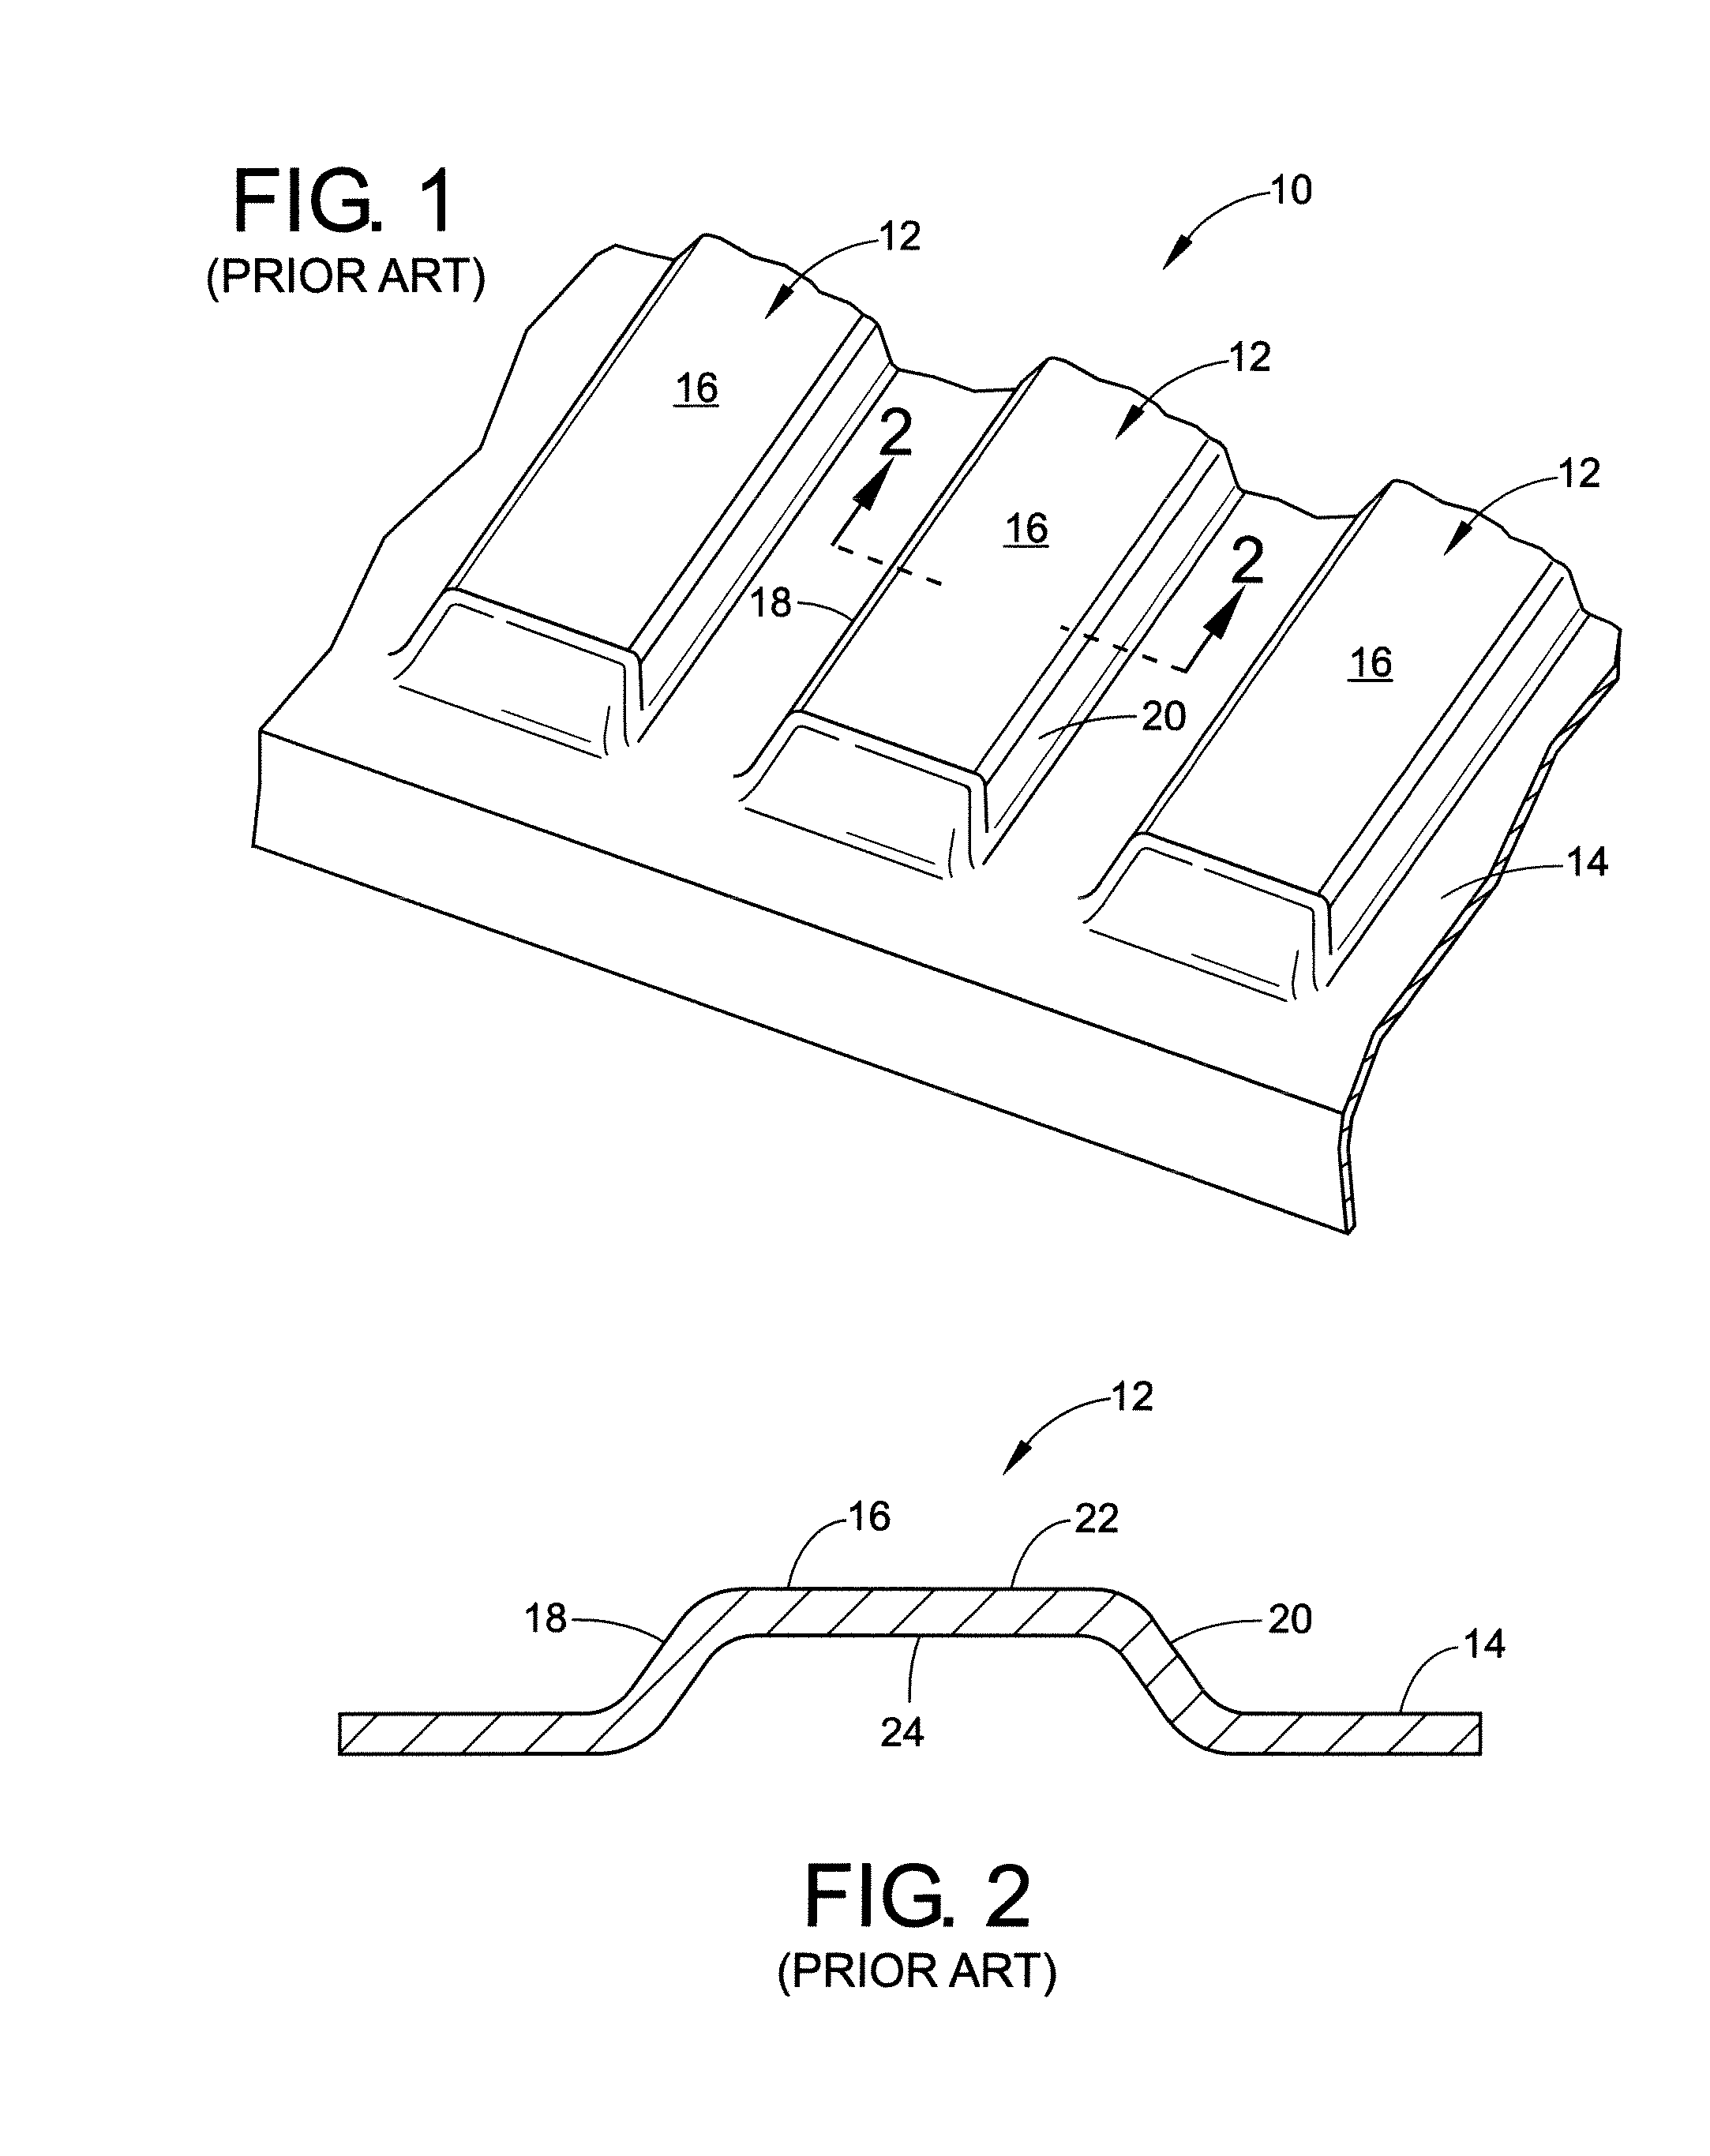 Bed corrugation for vehicle load-carrying bed